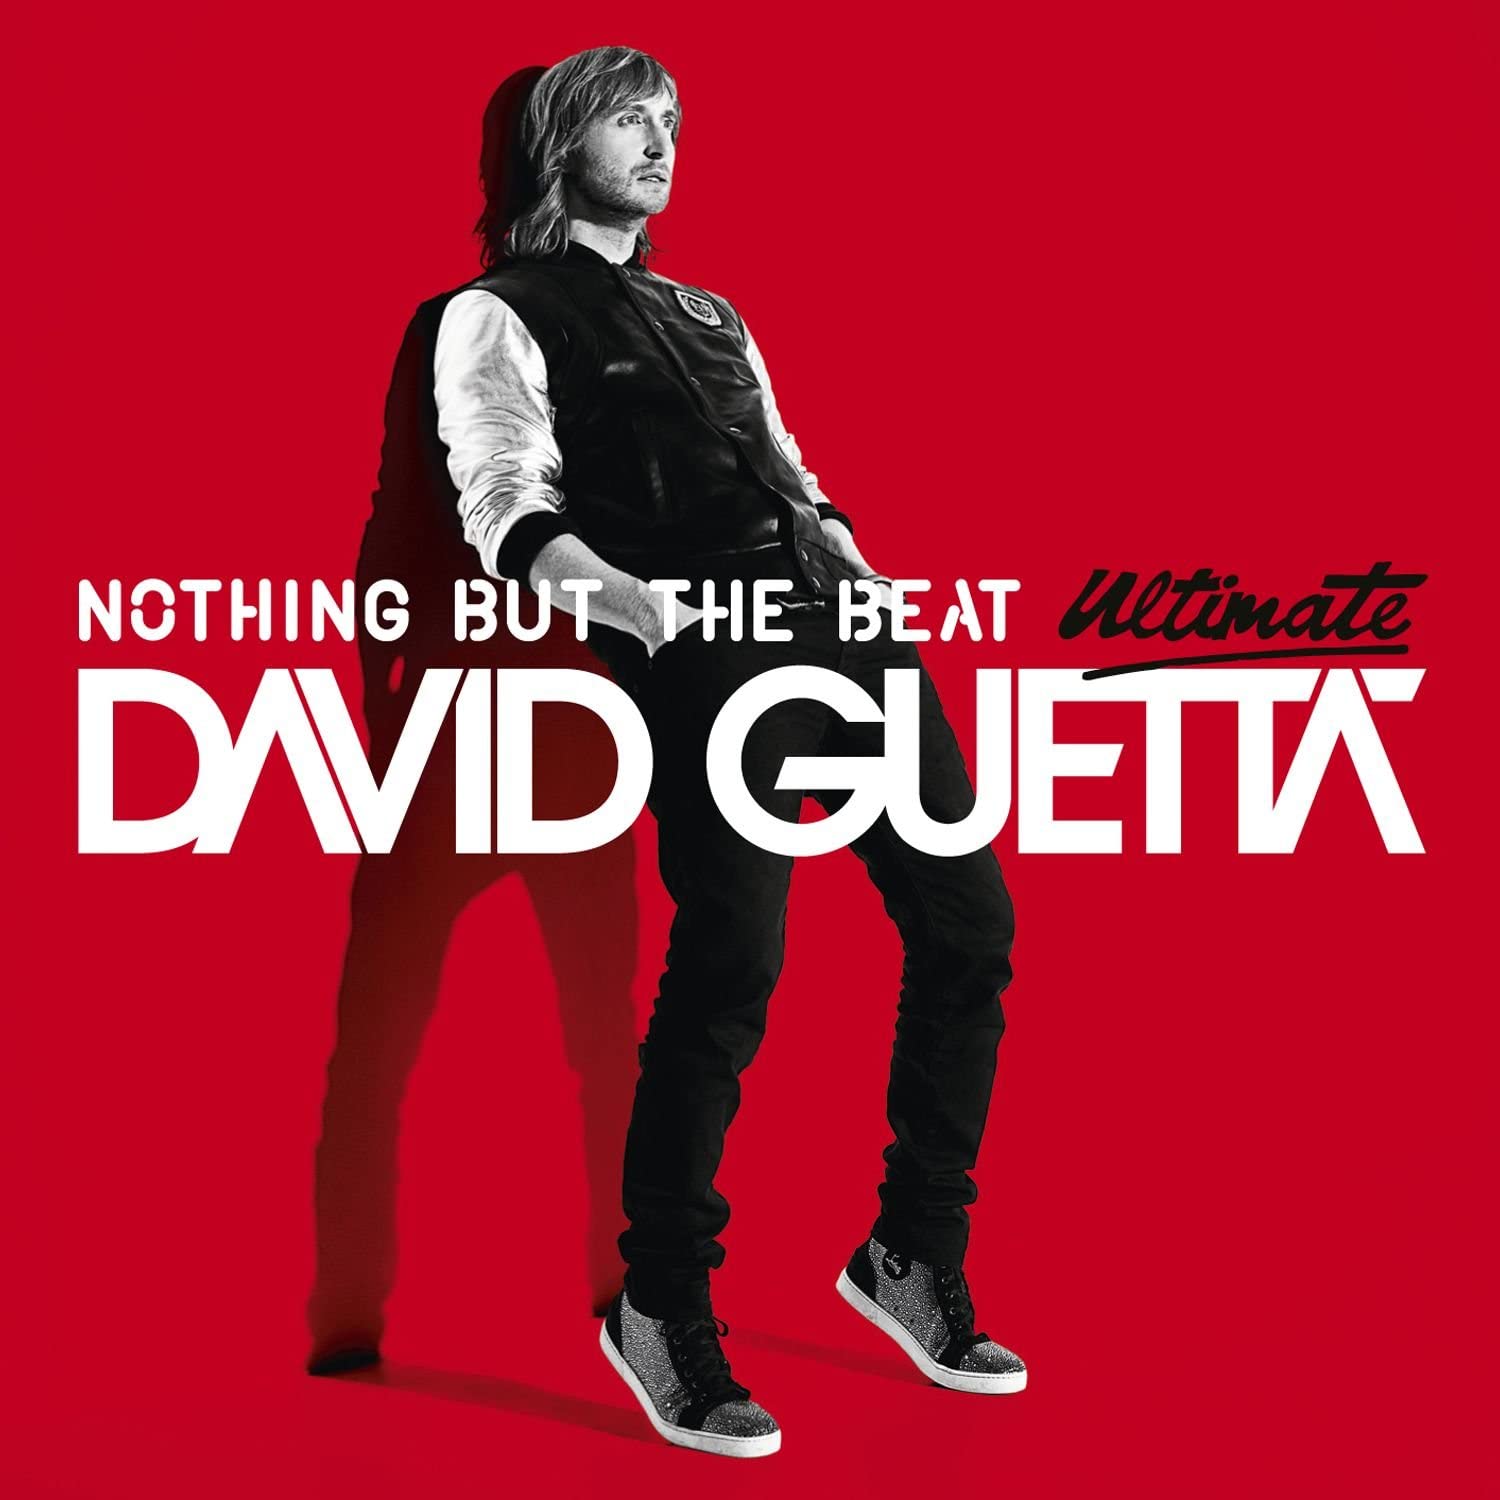 Nothing But The Beat - Ultimate | David Guetta